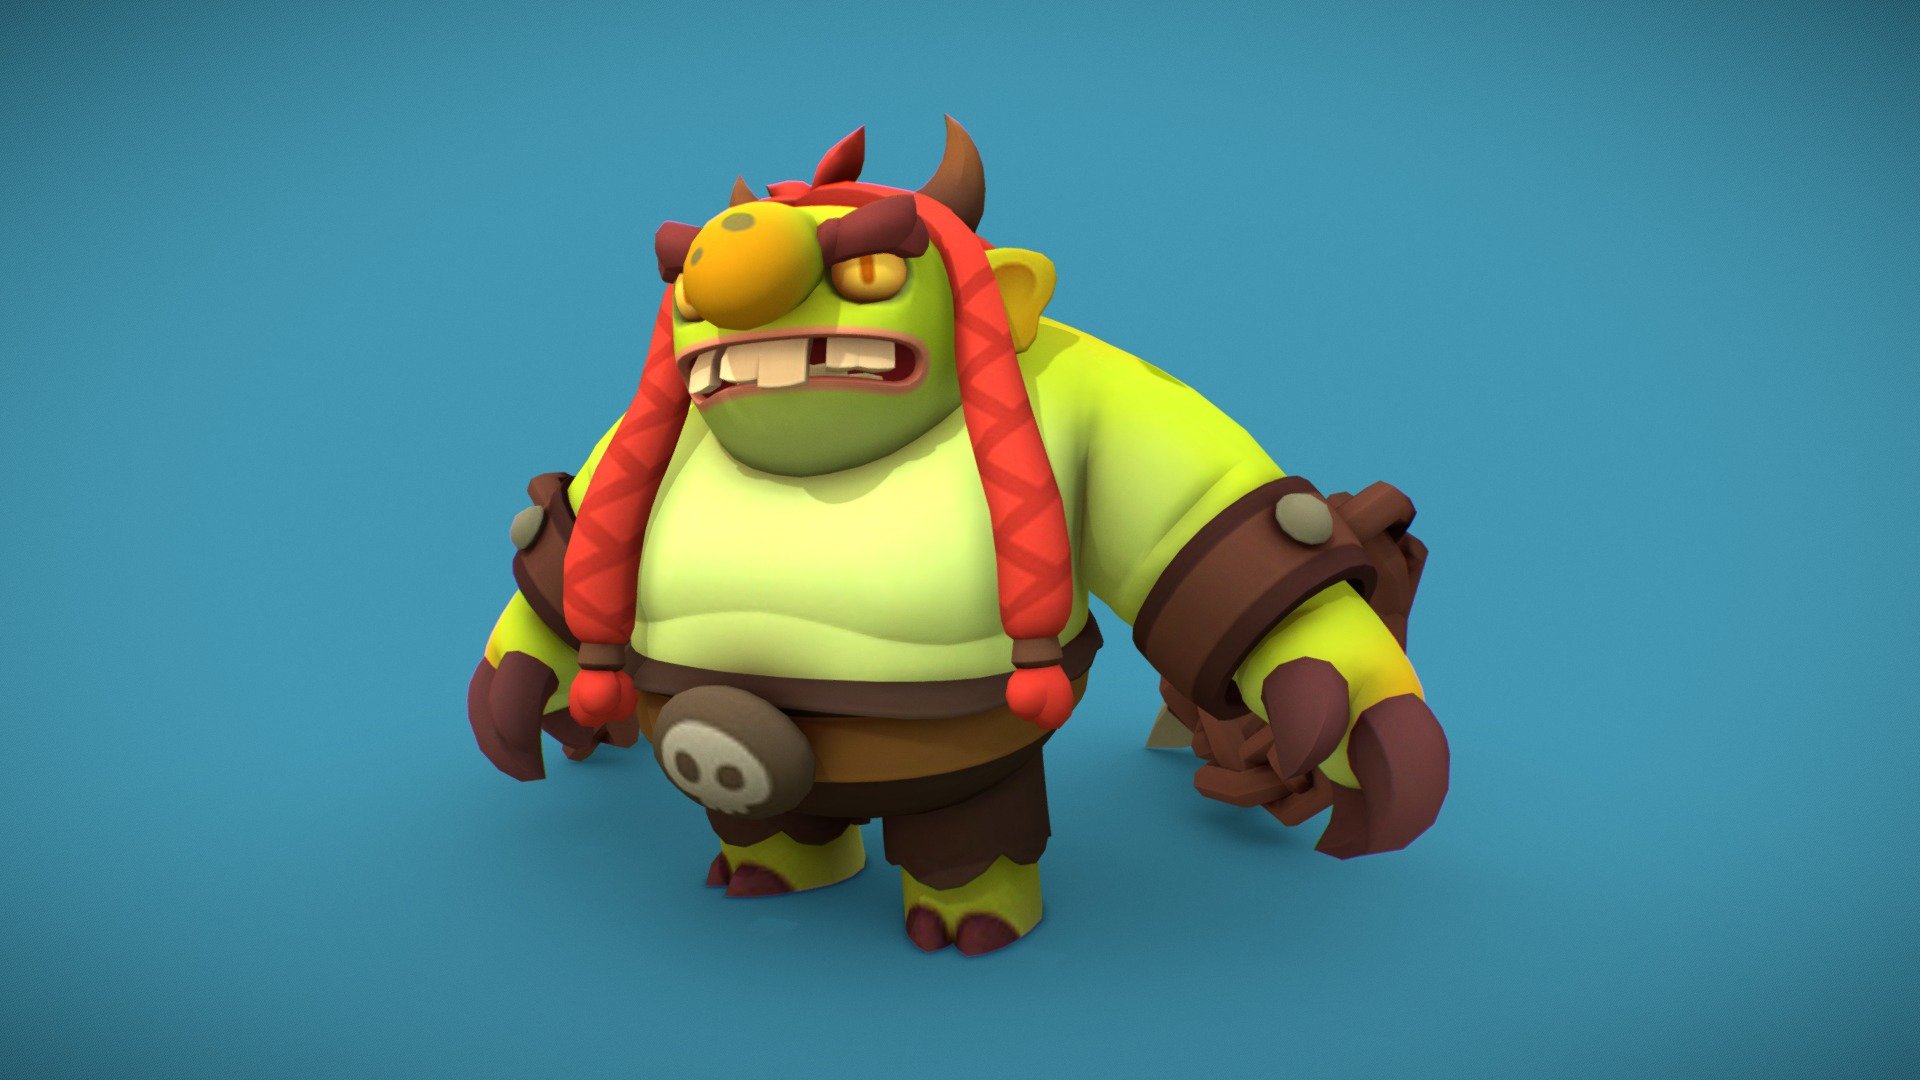 Chained Ogre boss model for mobile game “Warrior Way – One Way Story”.
Specs: 10493 vertices / 12548 triangles / 512x512 color texture - Warrior Way – ChainedOgre - 3D model by Sergey Makarich (@truemakar) 3d model